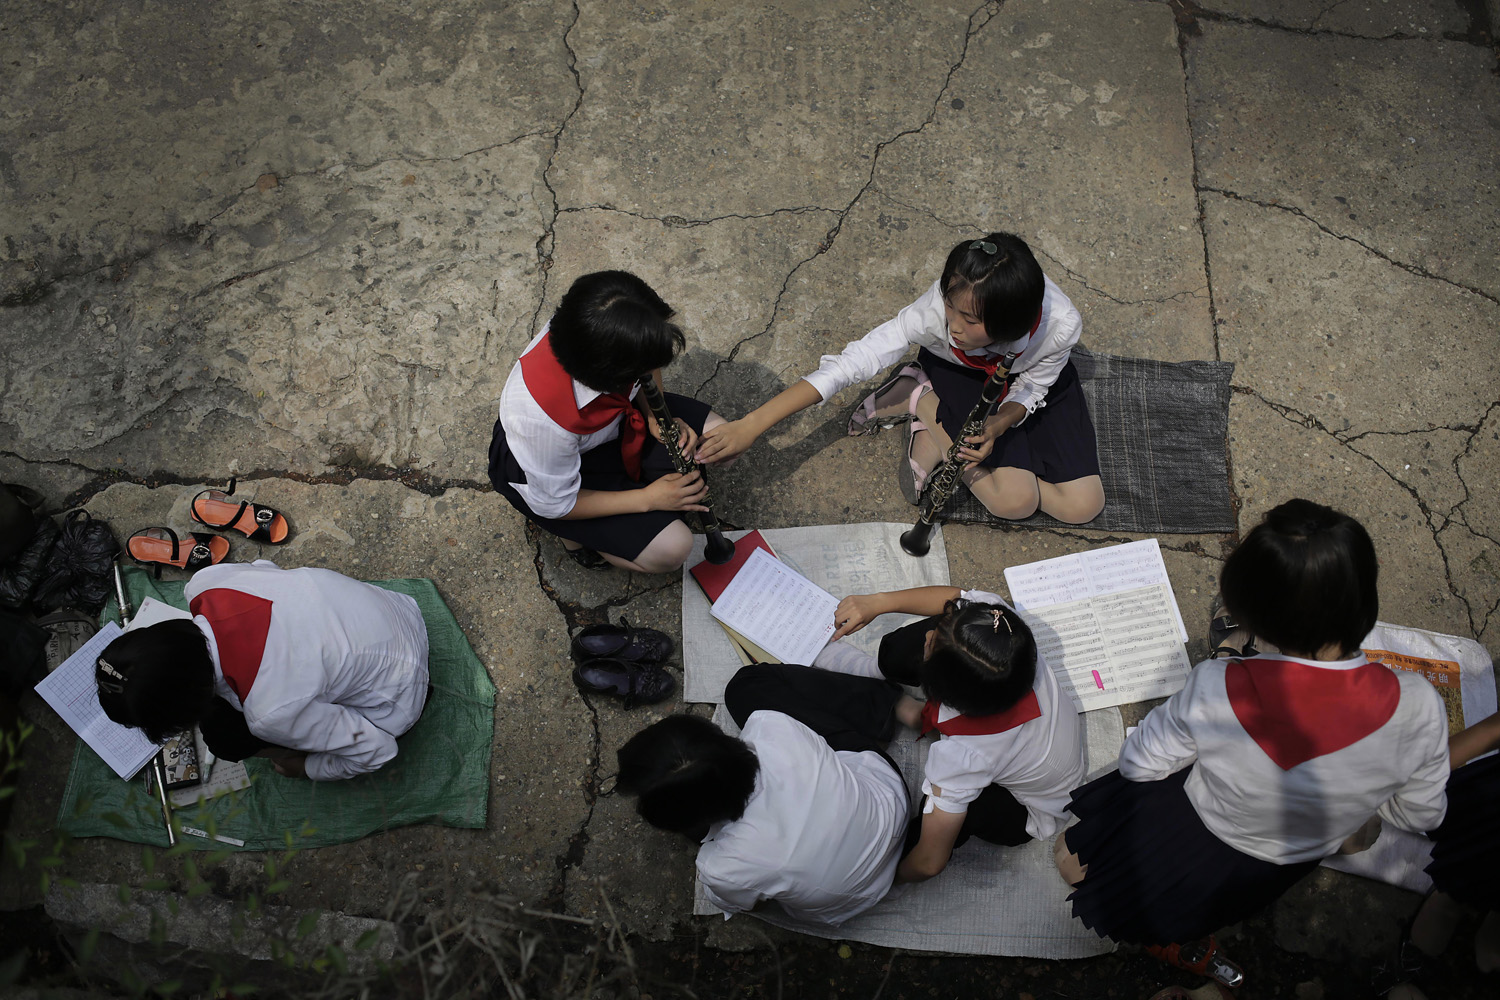 Students practice playing their musical instruments at the Moranbong (Moran Hill) in Pyongyang, Jul. 31, 2014.